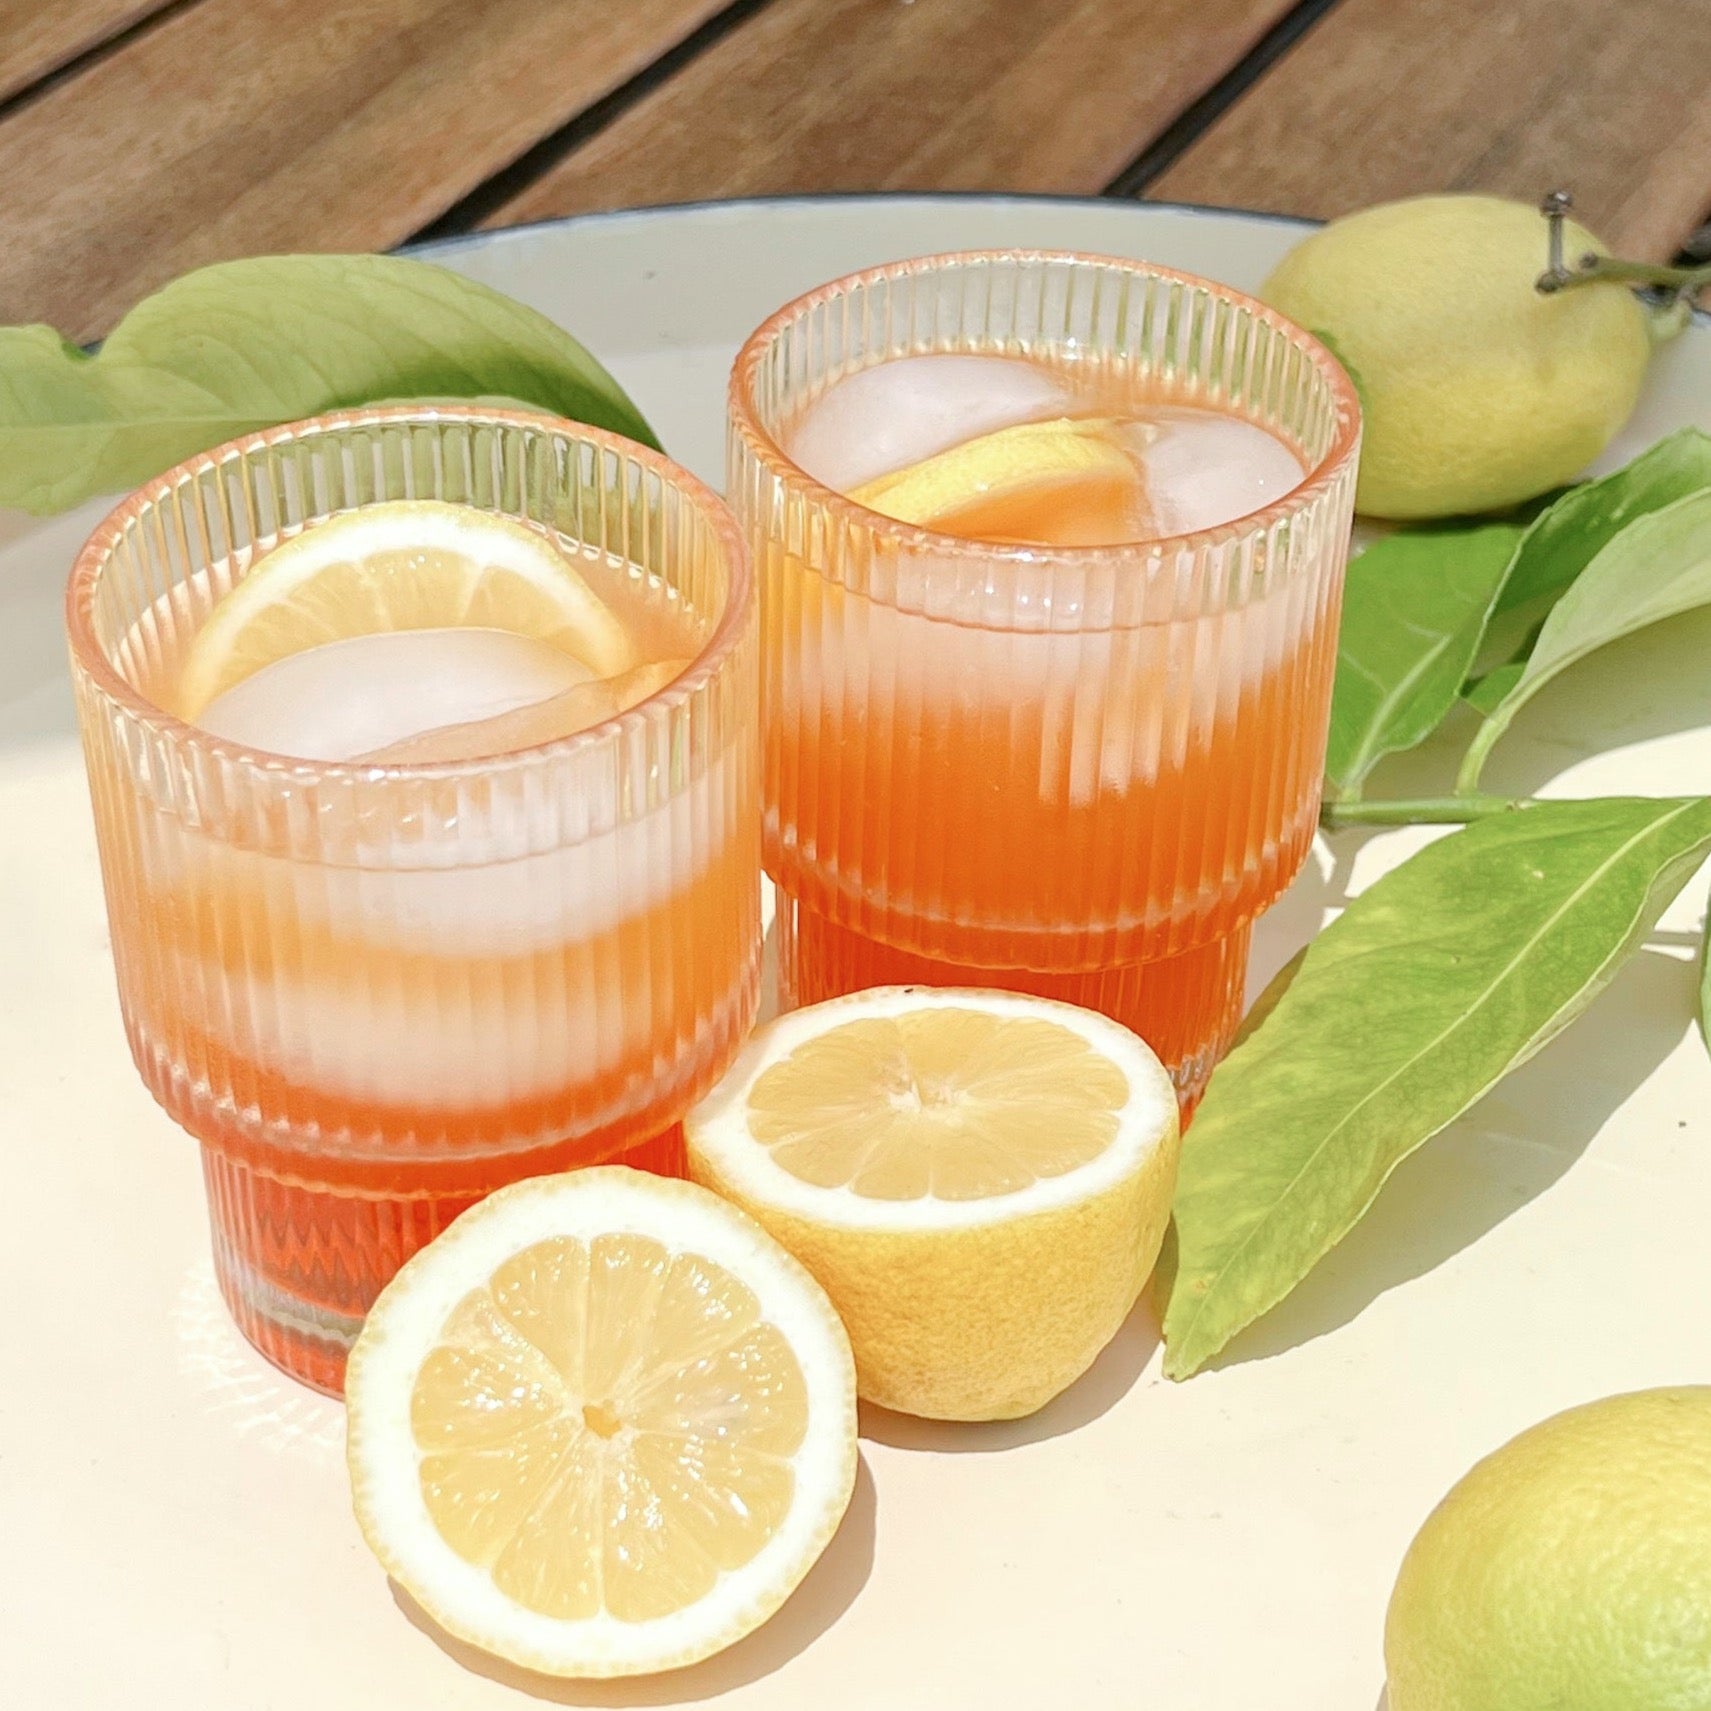 A set of clear ribbed cocktail glasses sitting on a marble tray holding an orange colored drinks next to some lemon slices.